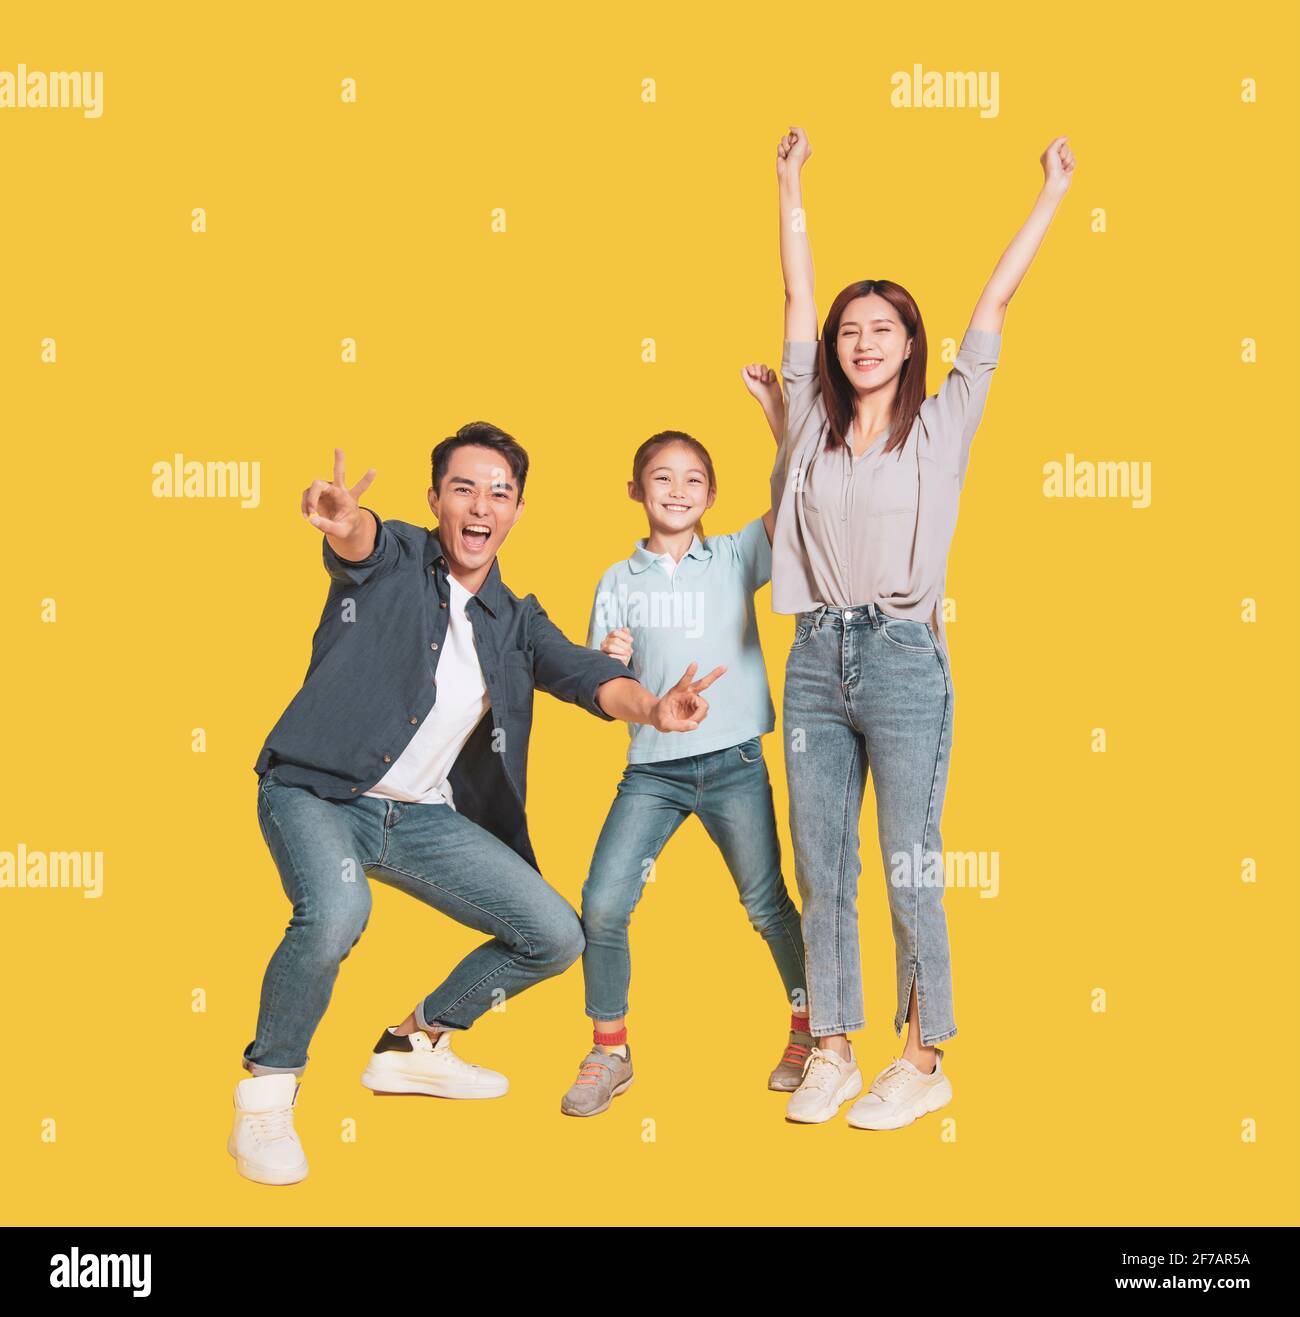 Happy young family with one child standing together Stock Photo